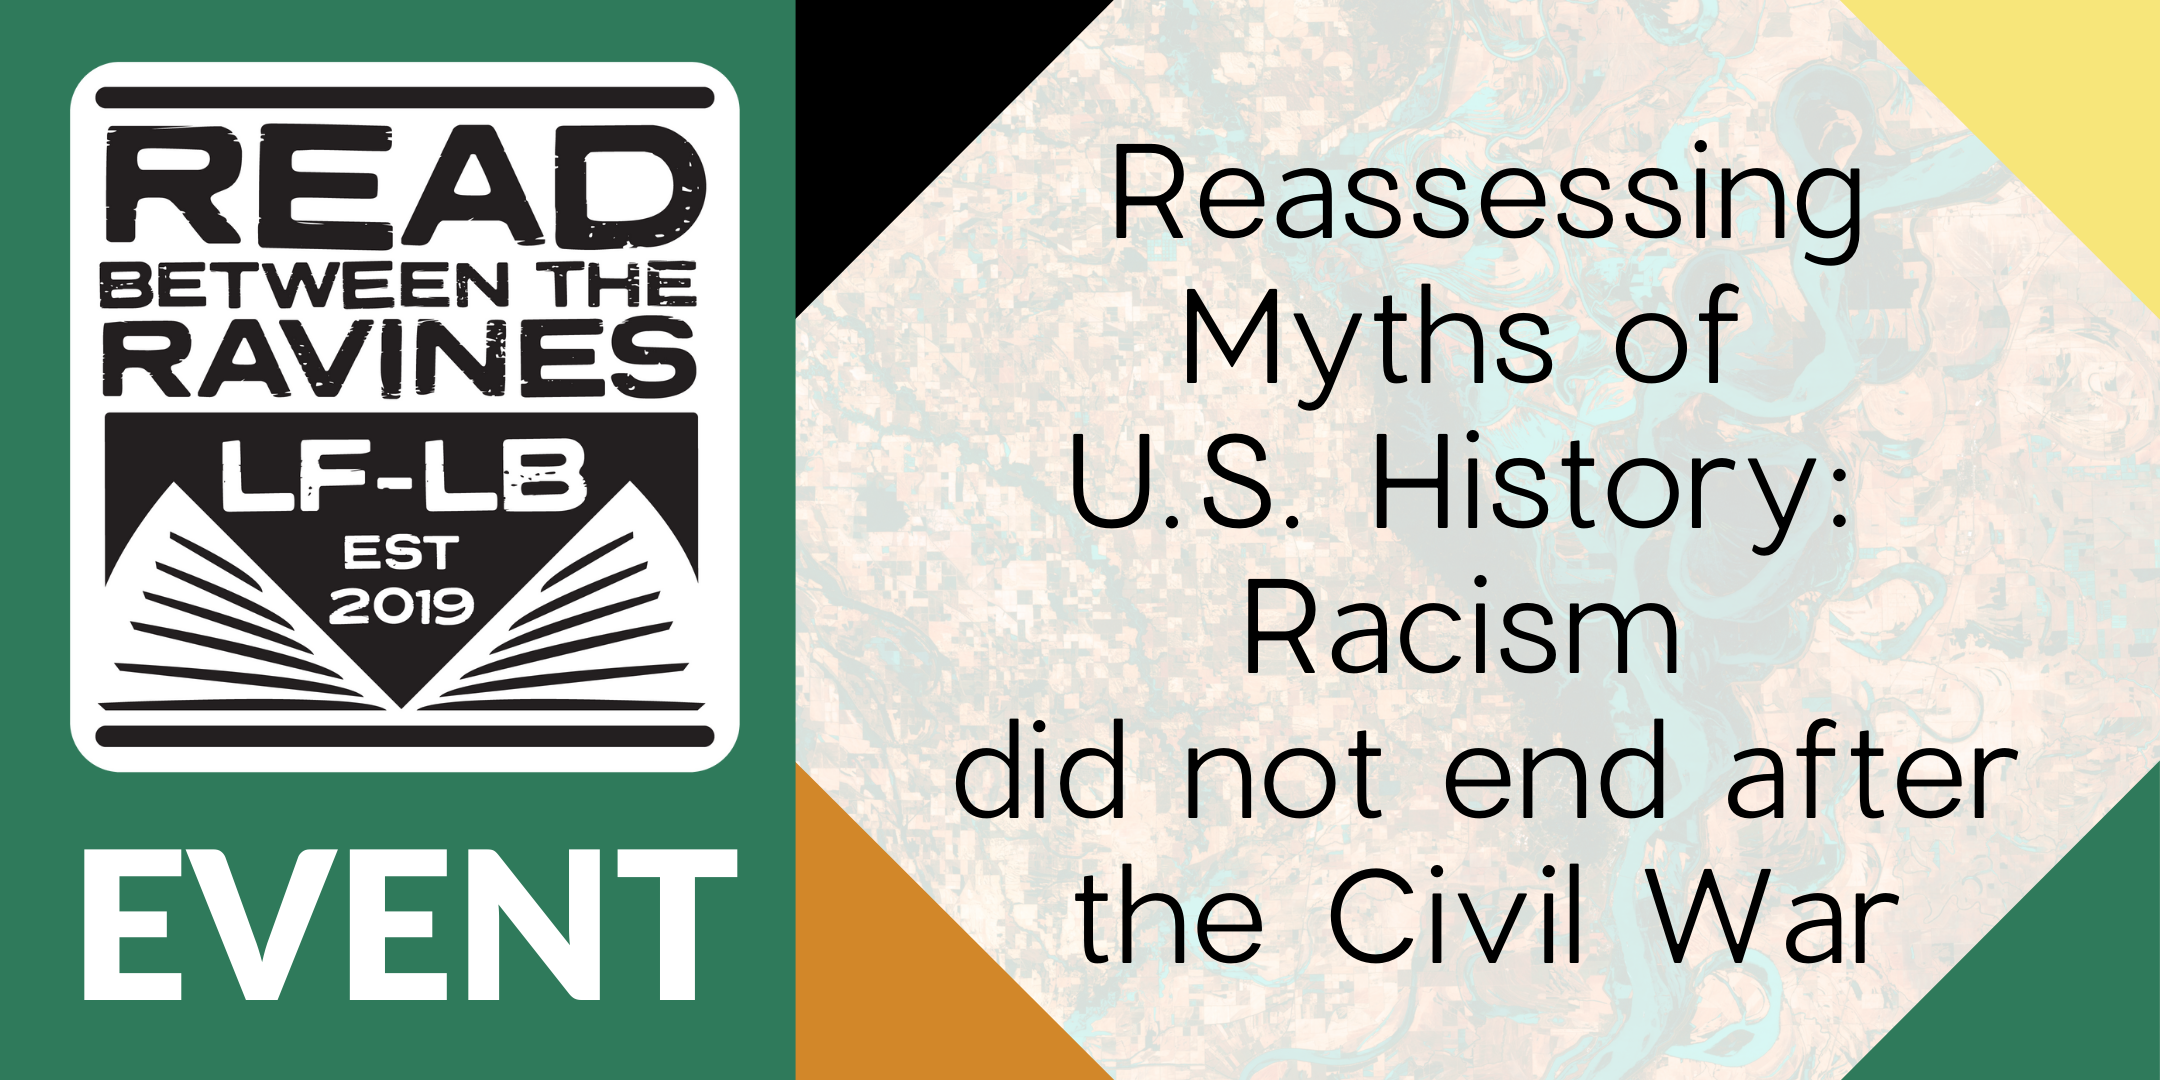 Read Between the Ravines Event: Reassessing Myths of U.S. History: Racism did not end after the Civil War image